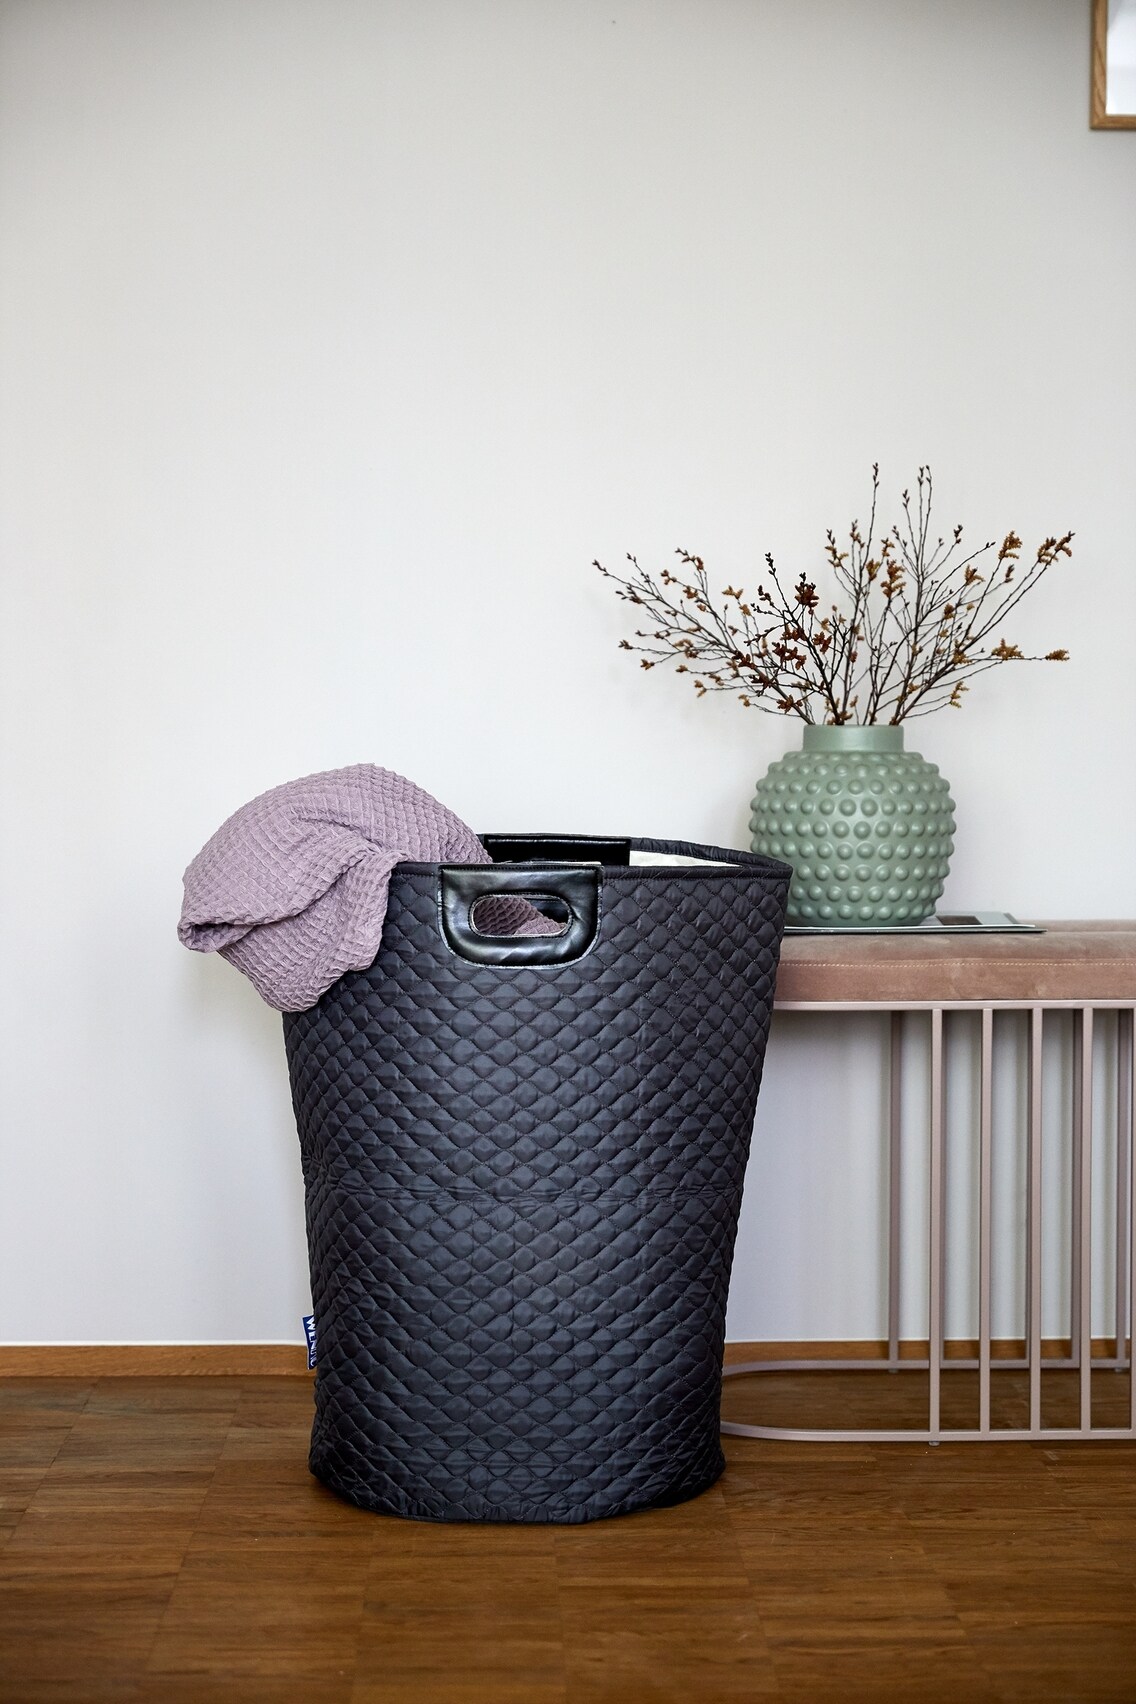 Details about   Laundry Bags Sloth Washing Foldable Laundry Baskets Mesh Hamper Clothes Storage 